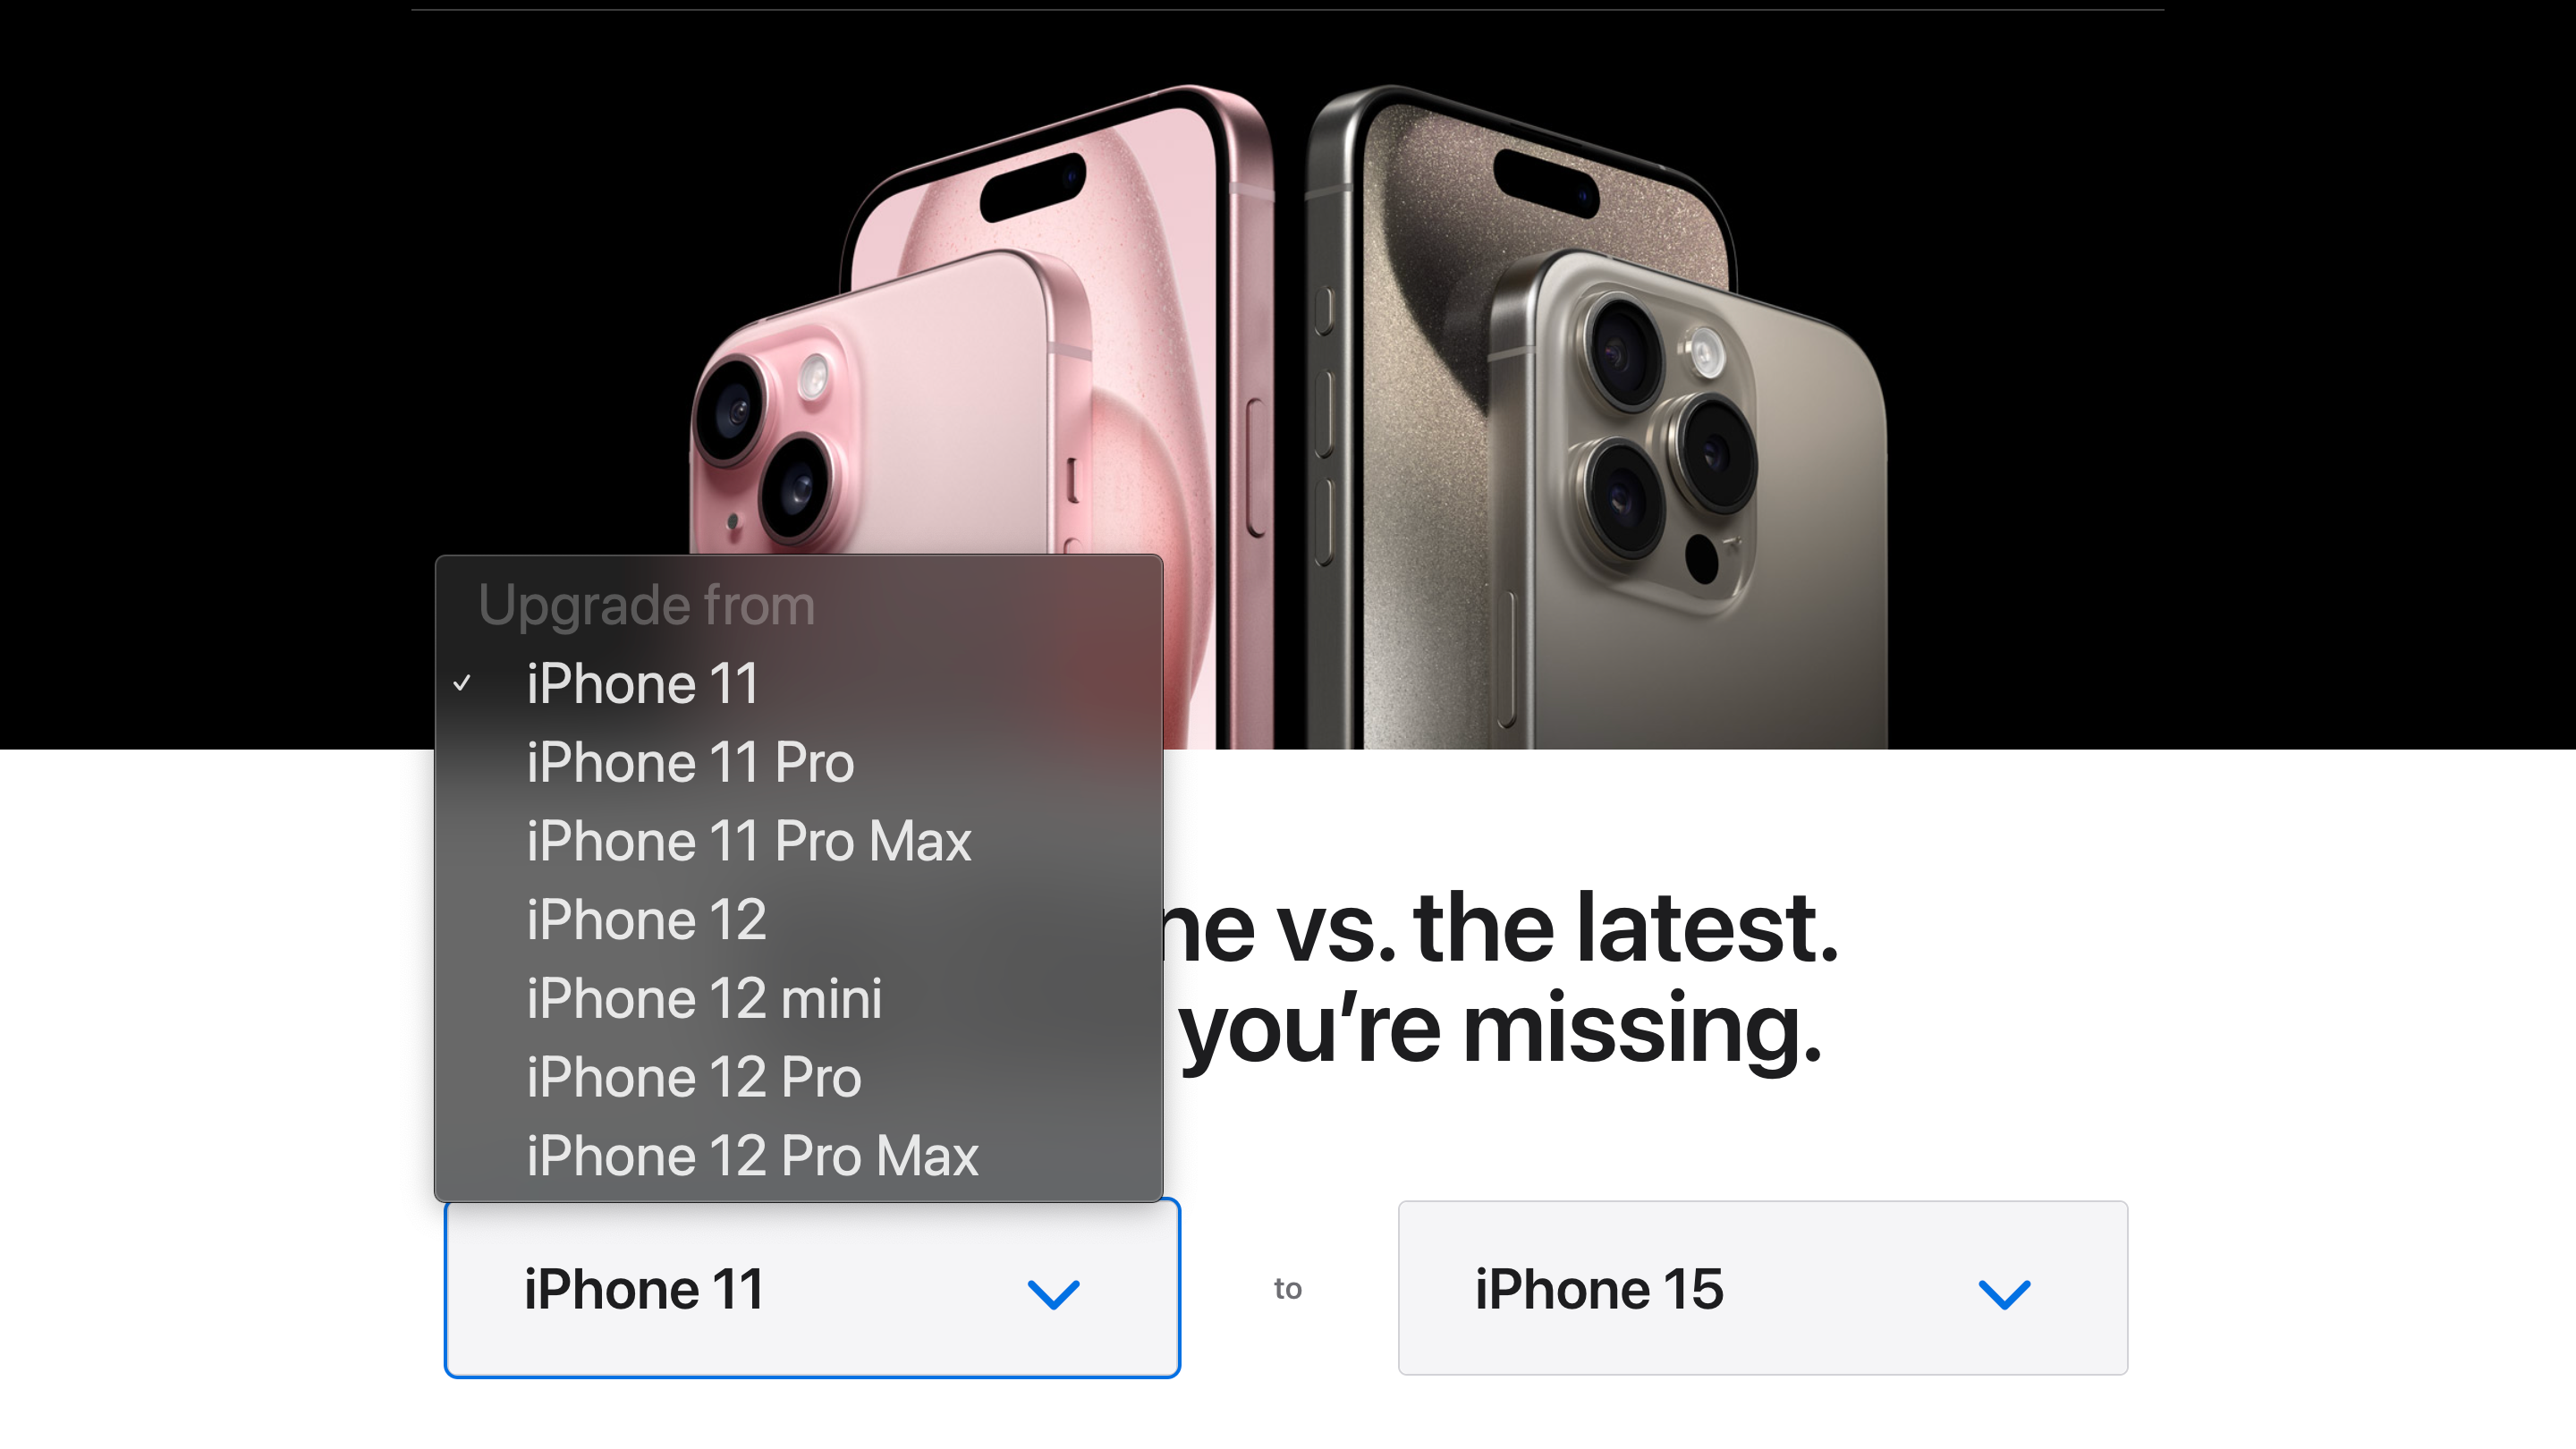 What about iPhone XS/X users, Apple? - Crazy but true! Apple “admits” you don’t need to upgrade to iPhone 15 (and I agree)